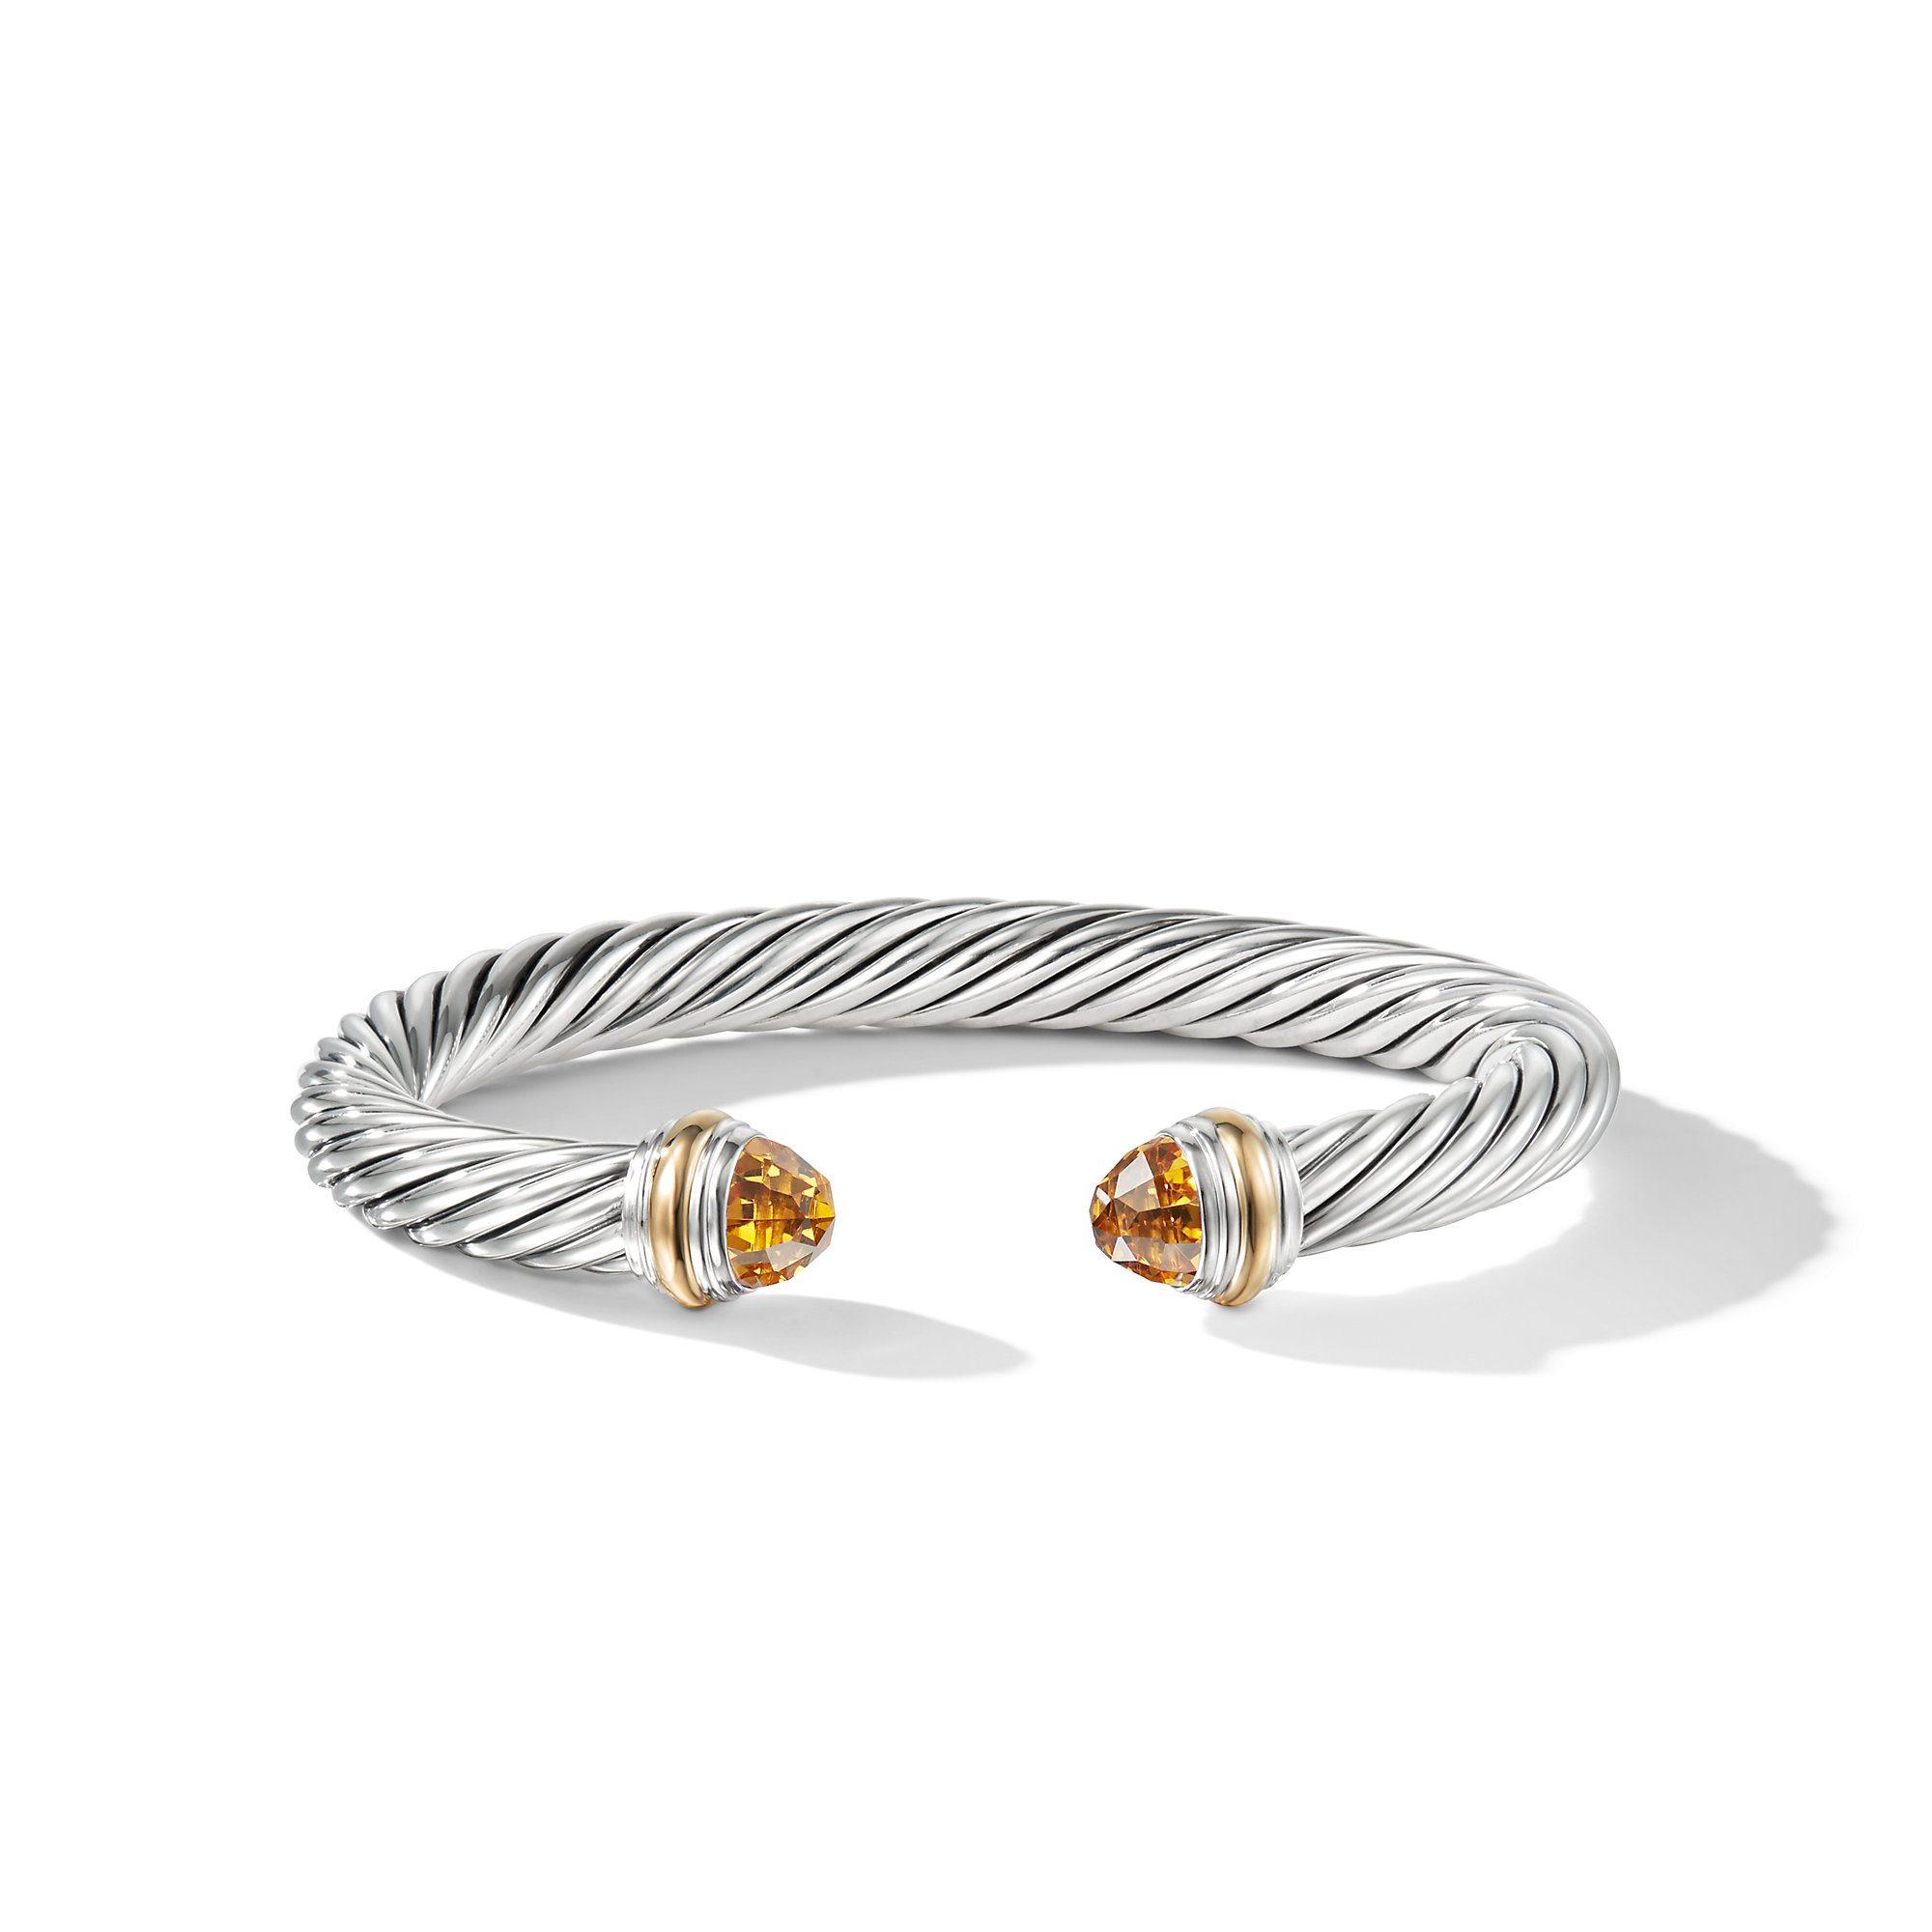 David Yurman Classic Cable 7mm Bracelet with Gold and Citrine